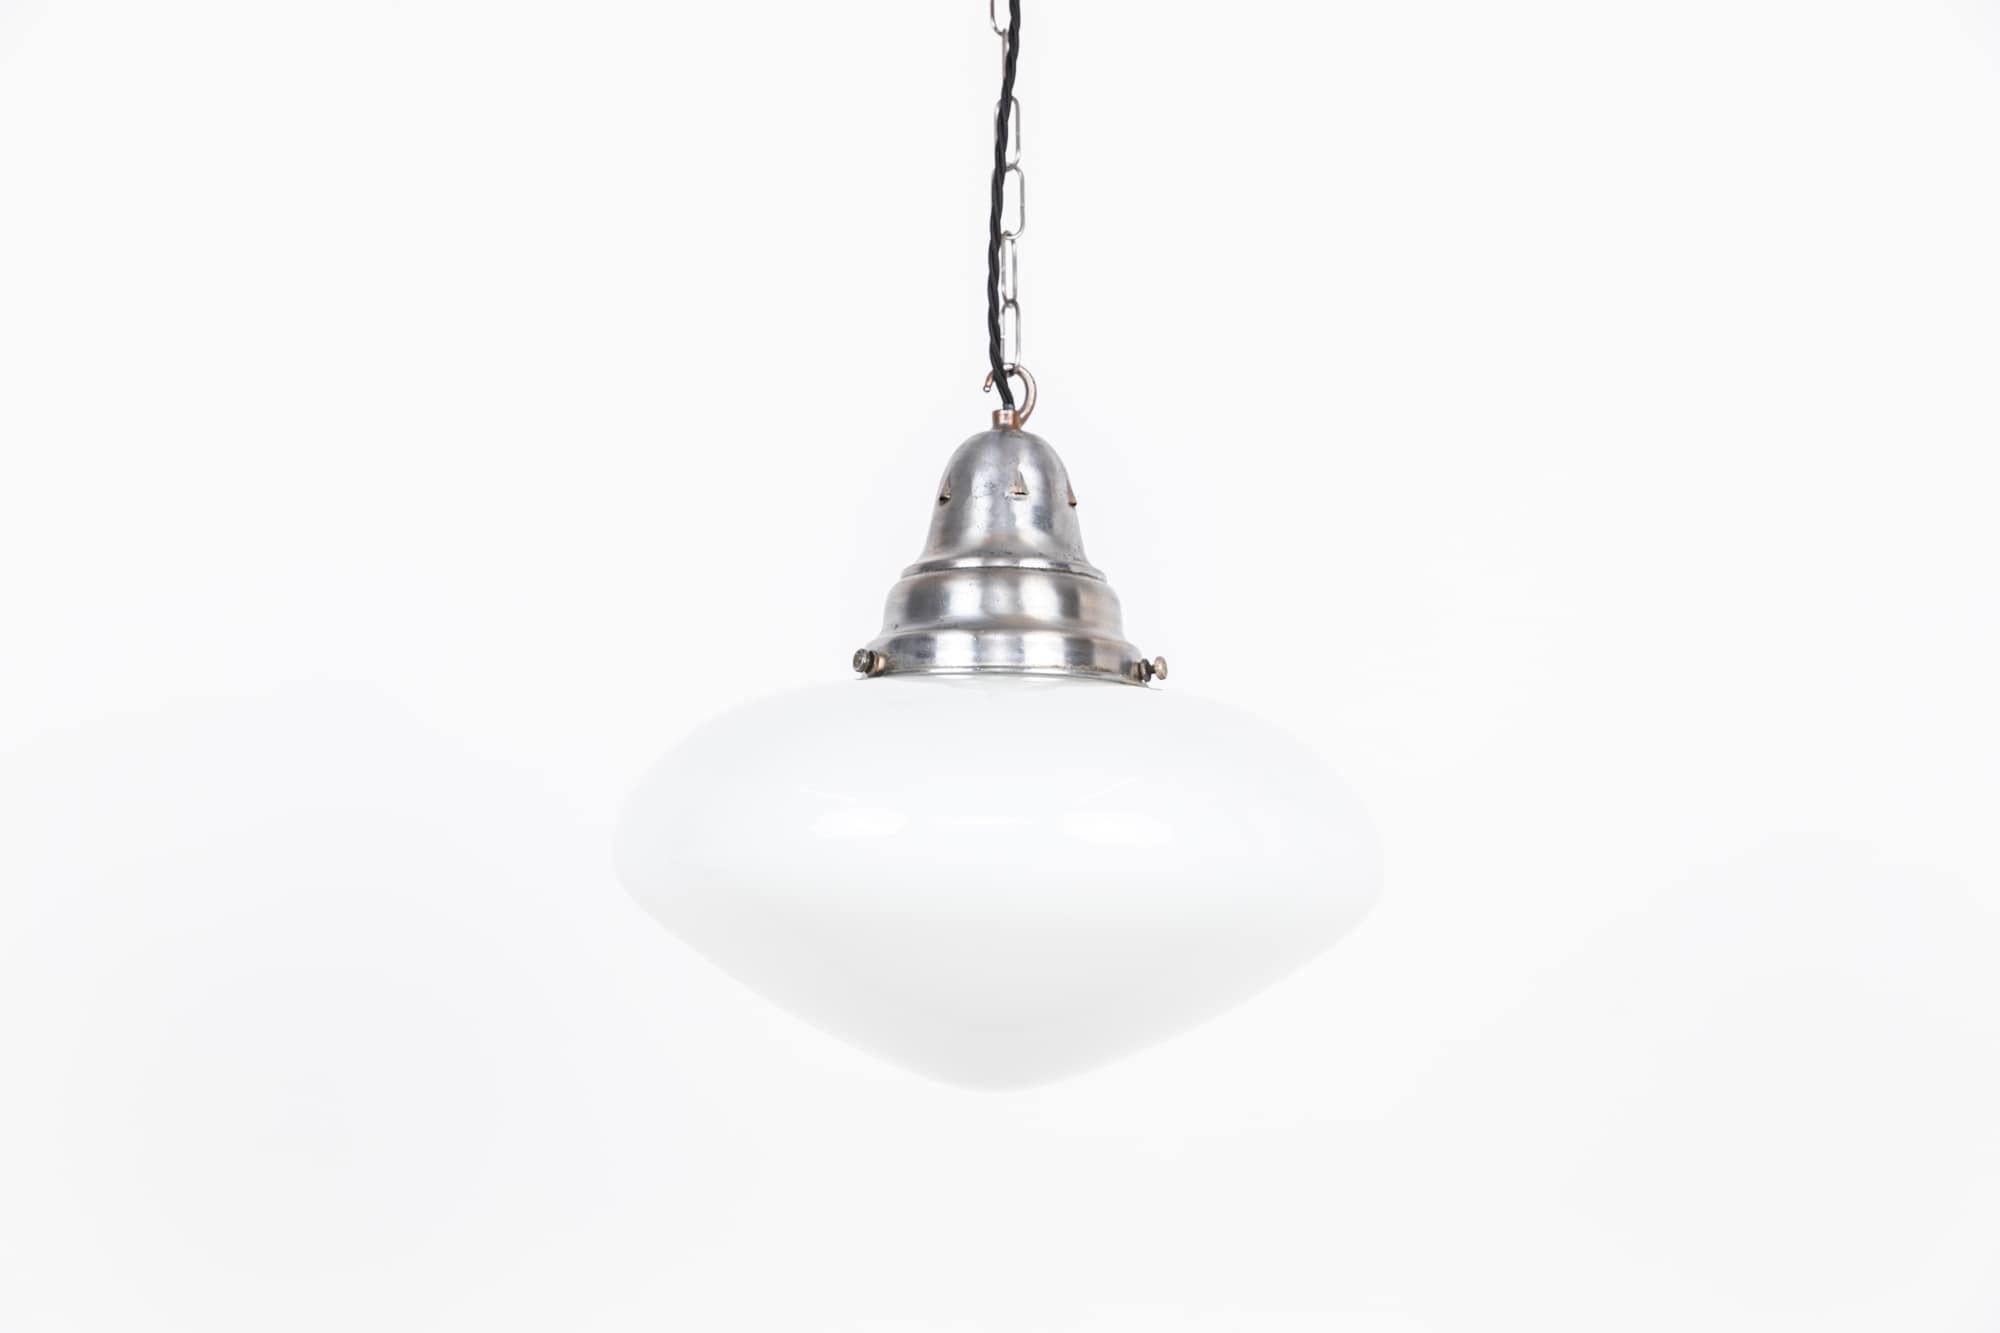 

An elegantly shaped opaline glass pendant light with gallery. c.1930

Of ovaloid form, white opaline glass and period tarnished nickel plated gallery.

Rewired with 1m of black twisted flex.

